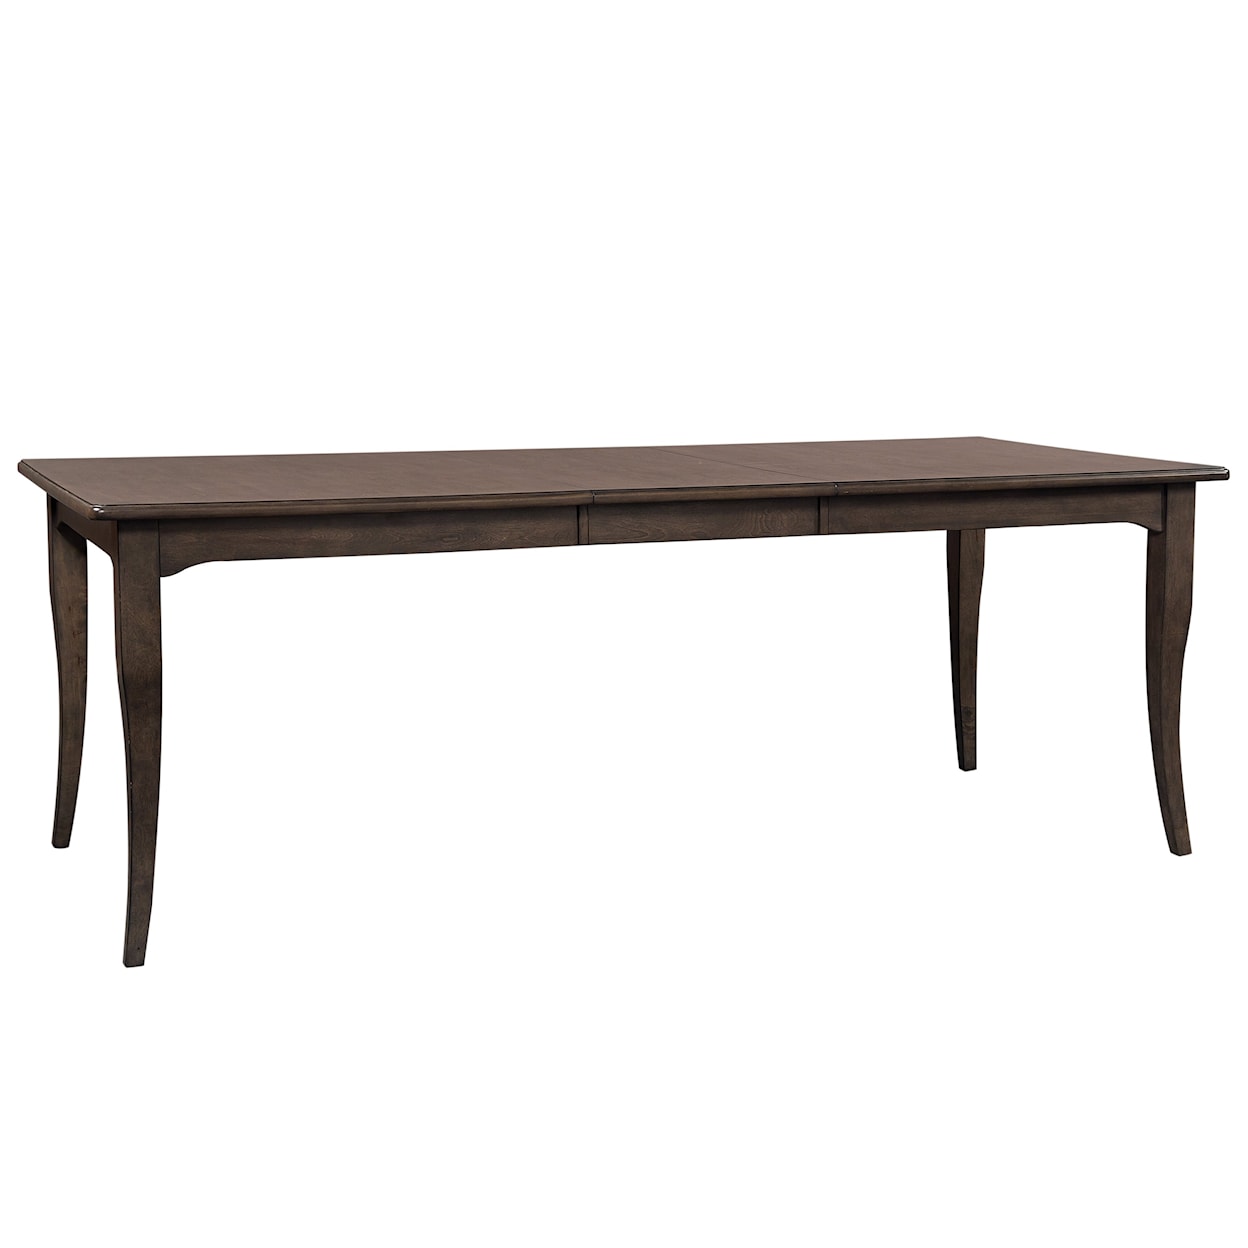 Aspenhome Blakely Dining Table